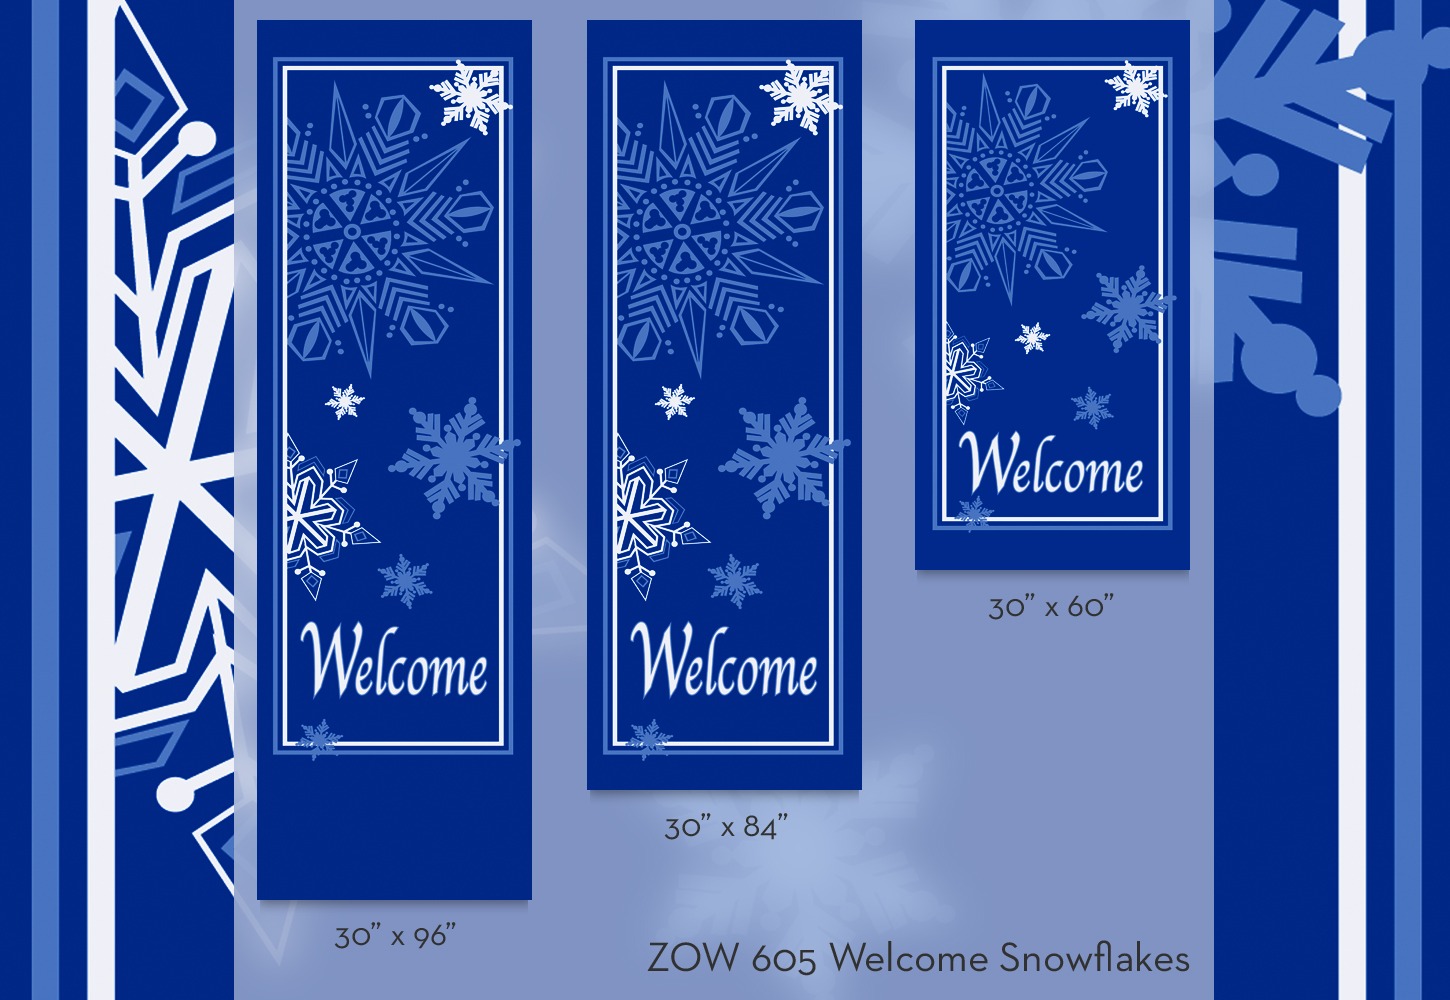 ZOW 605 Welcome Snowflakes